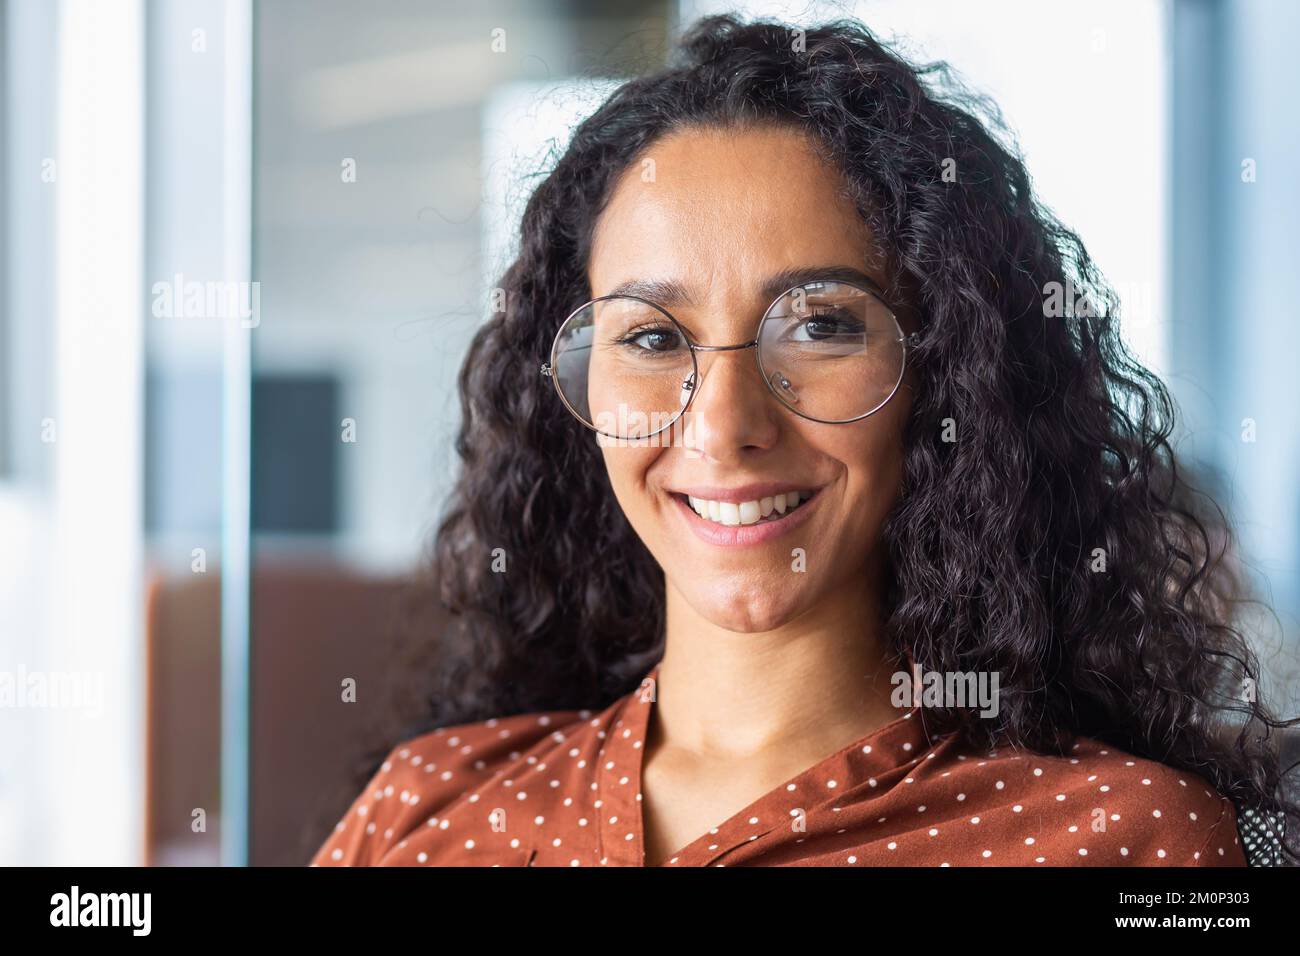 Close up photo portrait of beautiful Latin American woman with curly hair and glasses, businesswoman inside office building smiling and looking at camera. Stock Photo